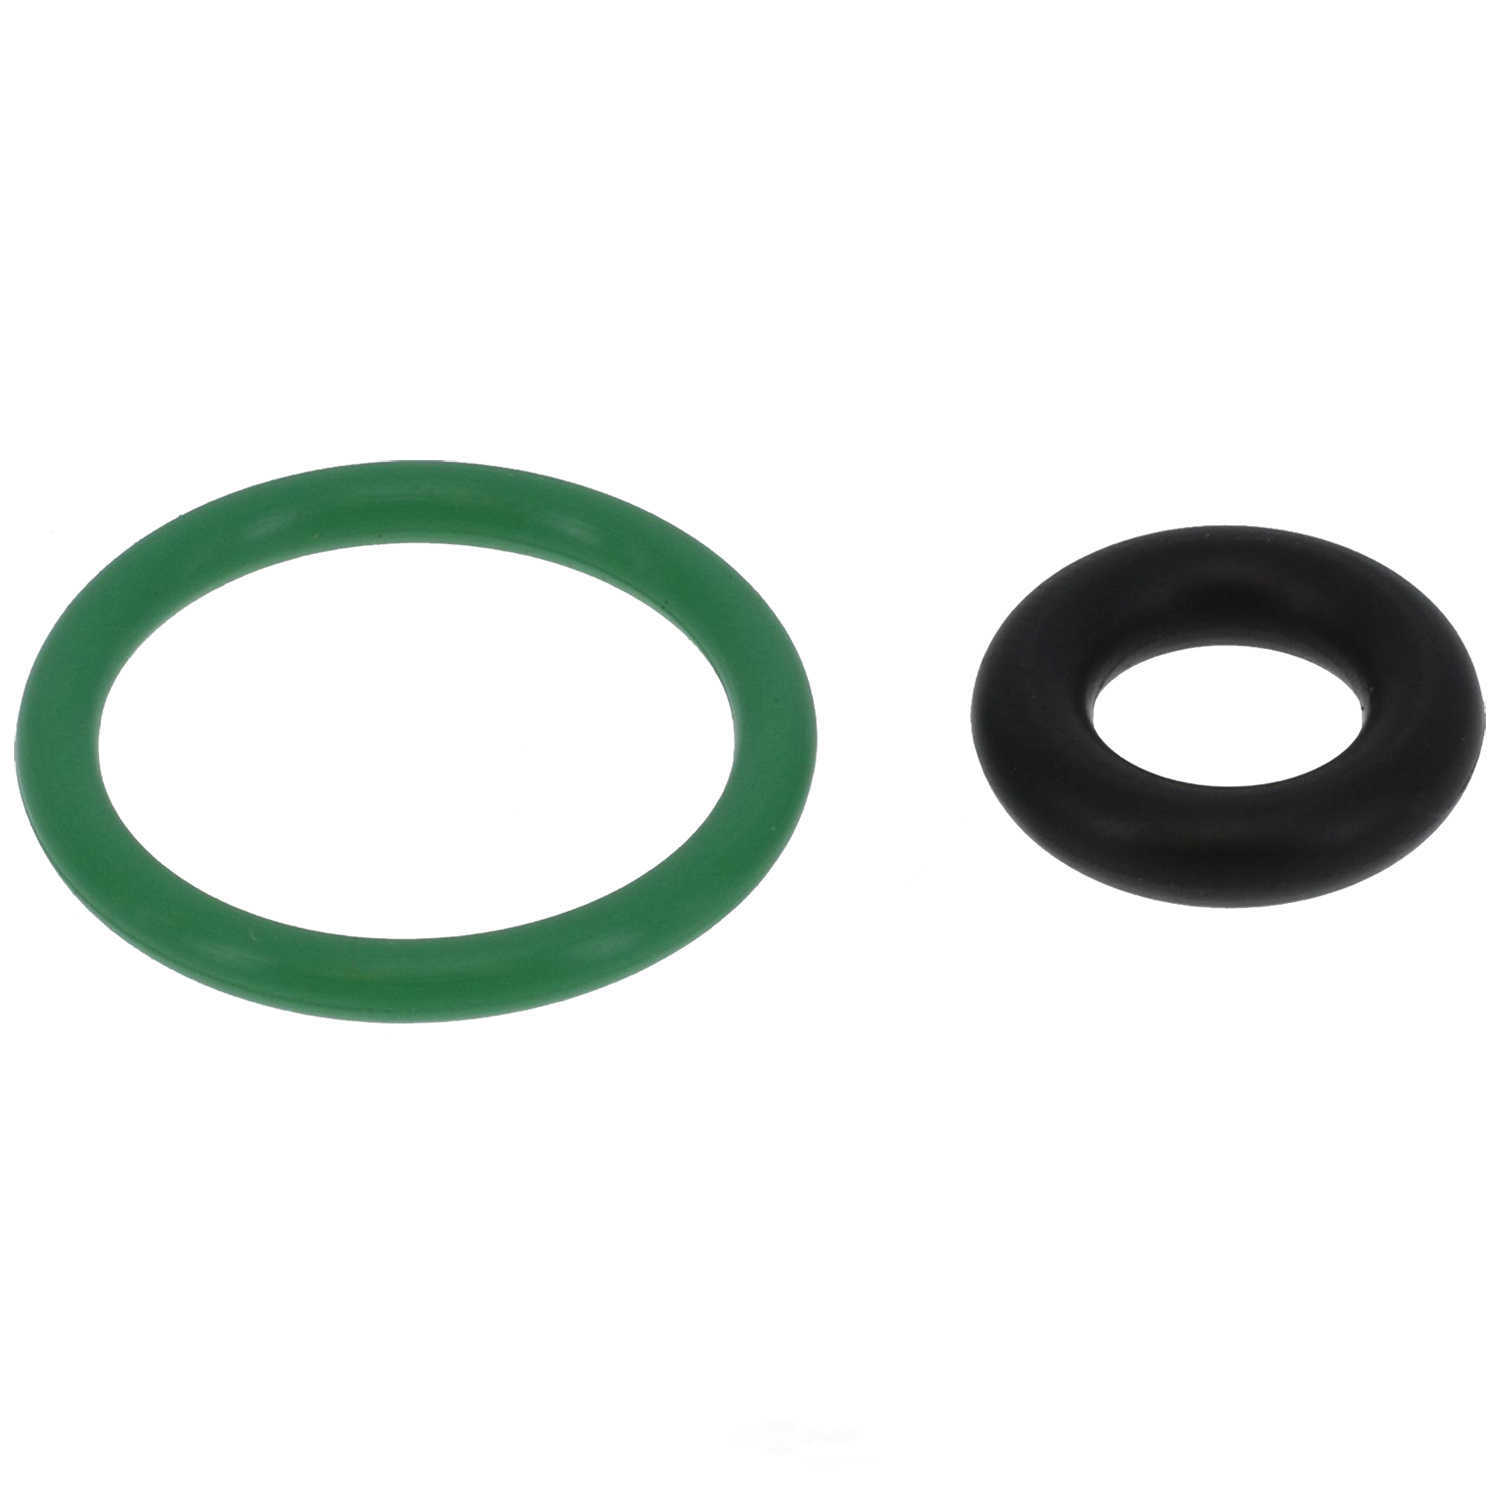 GB REMANUFACTURING INC. - Fuel Injector Seal Kit - GBR 8-012